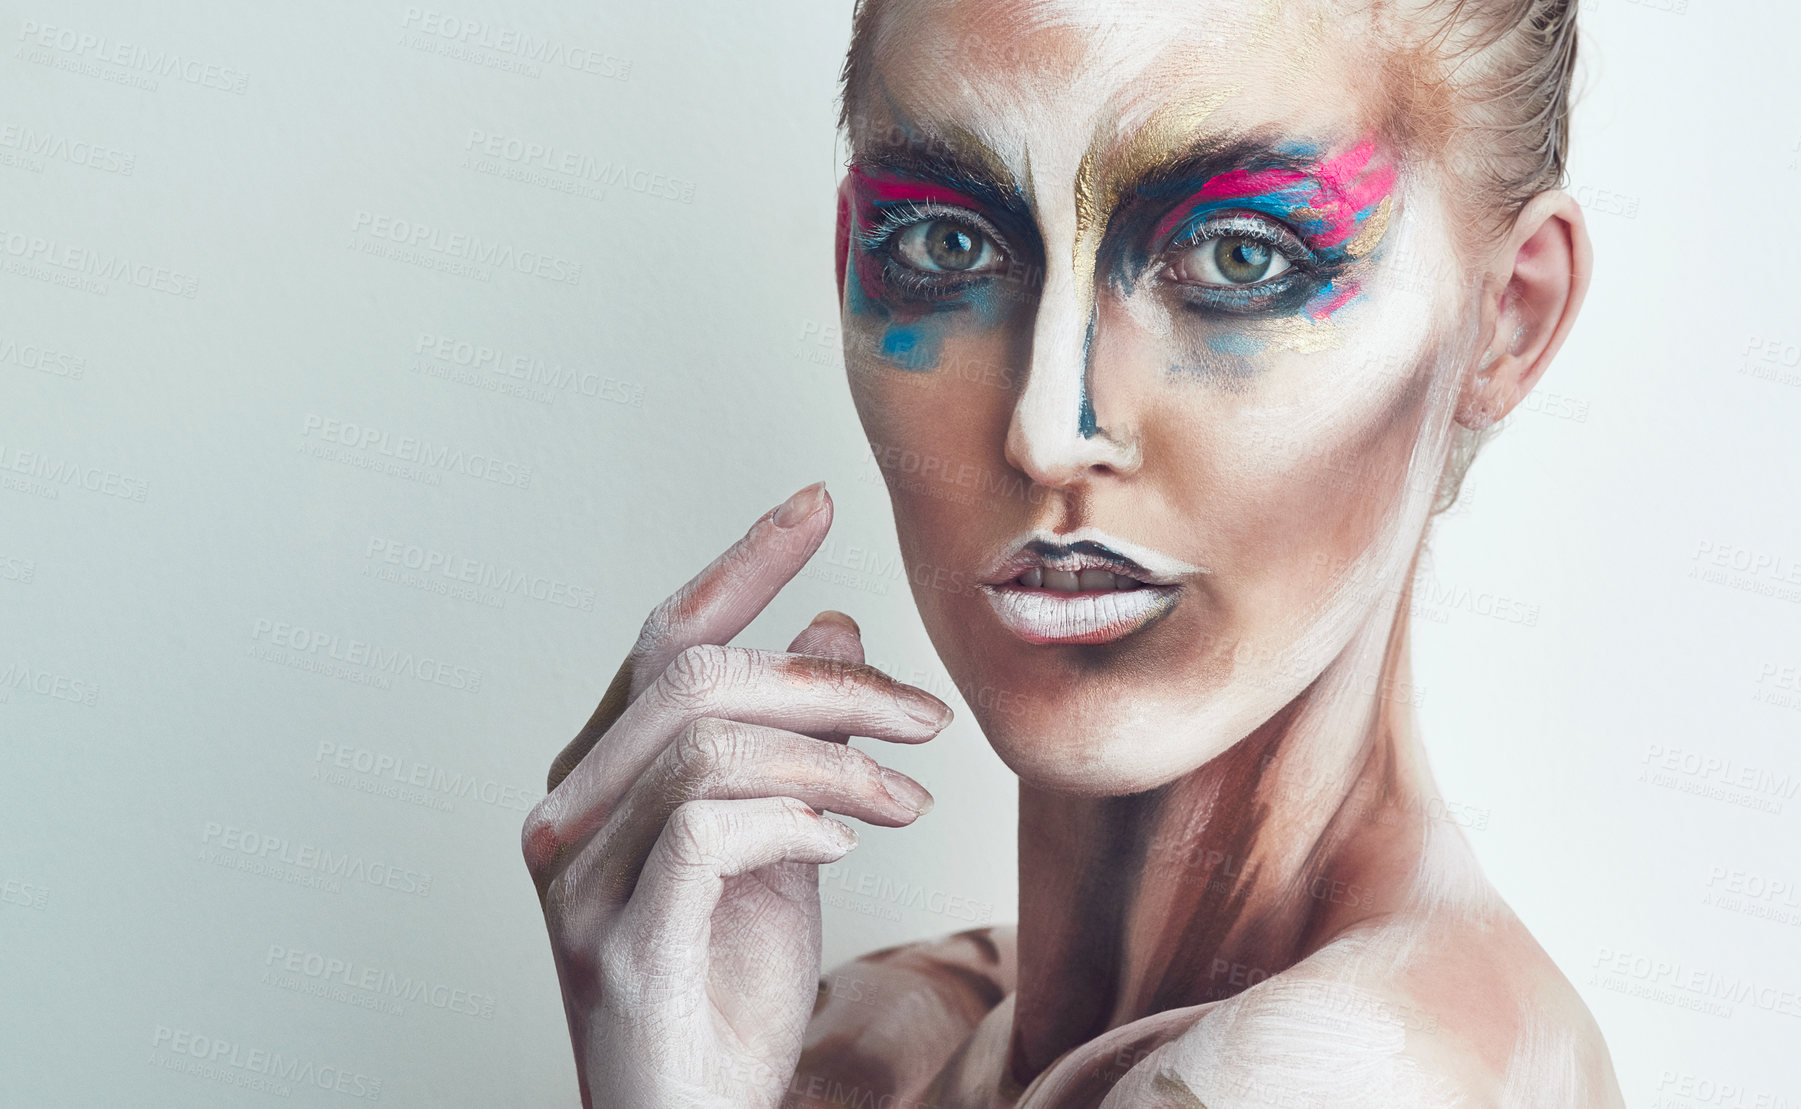 Buy stock photo Studio portrait of a young woman posing with paint on her face